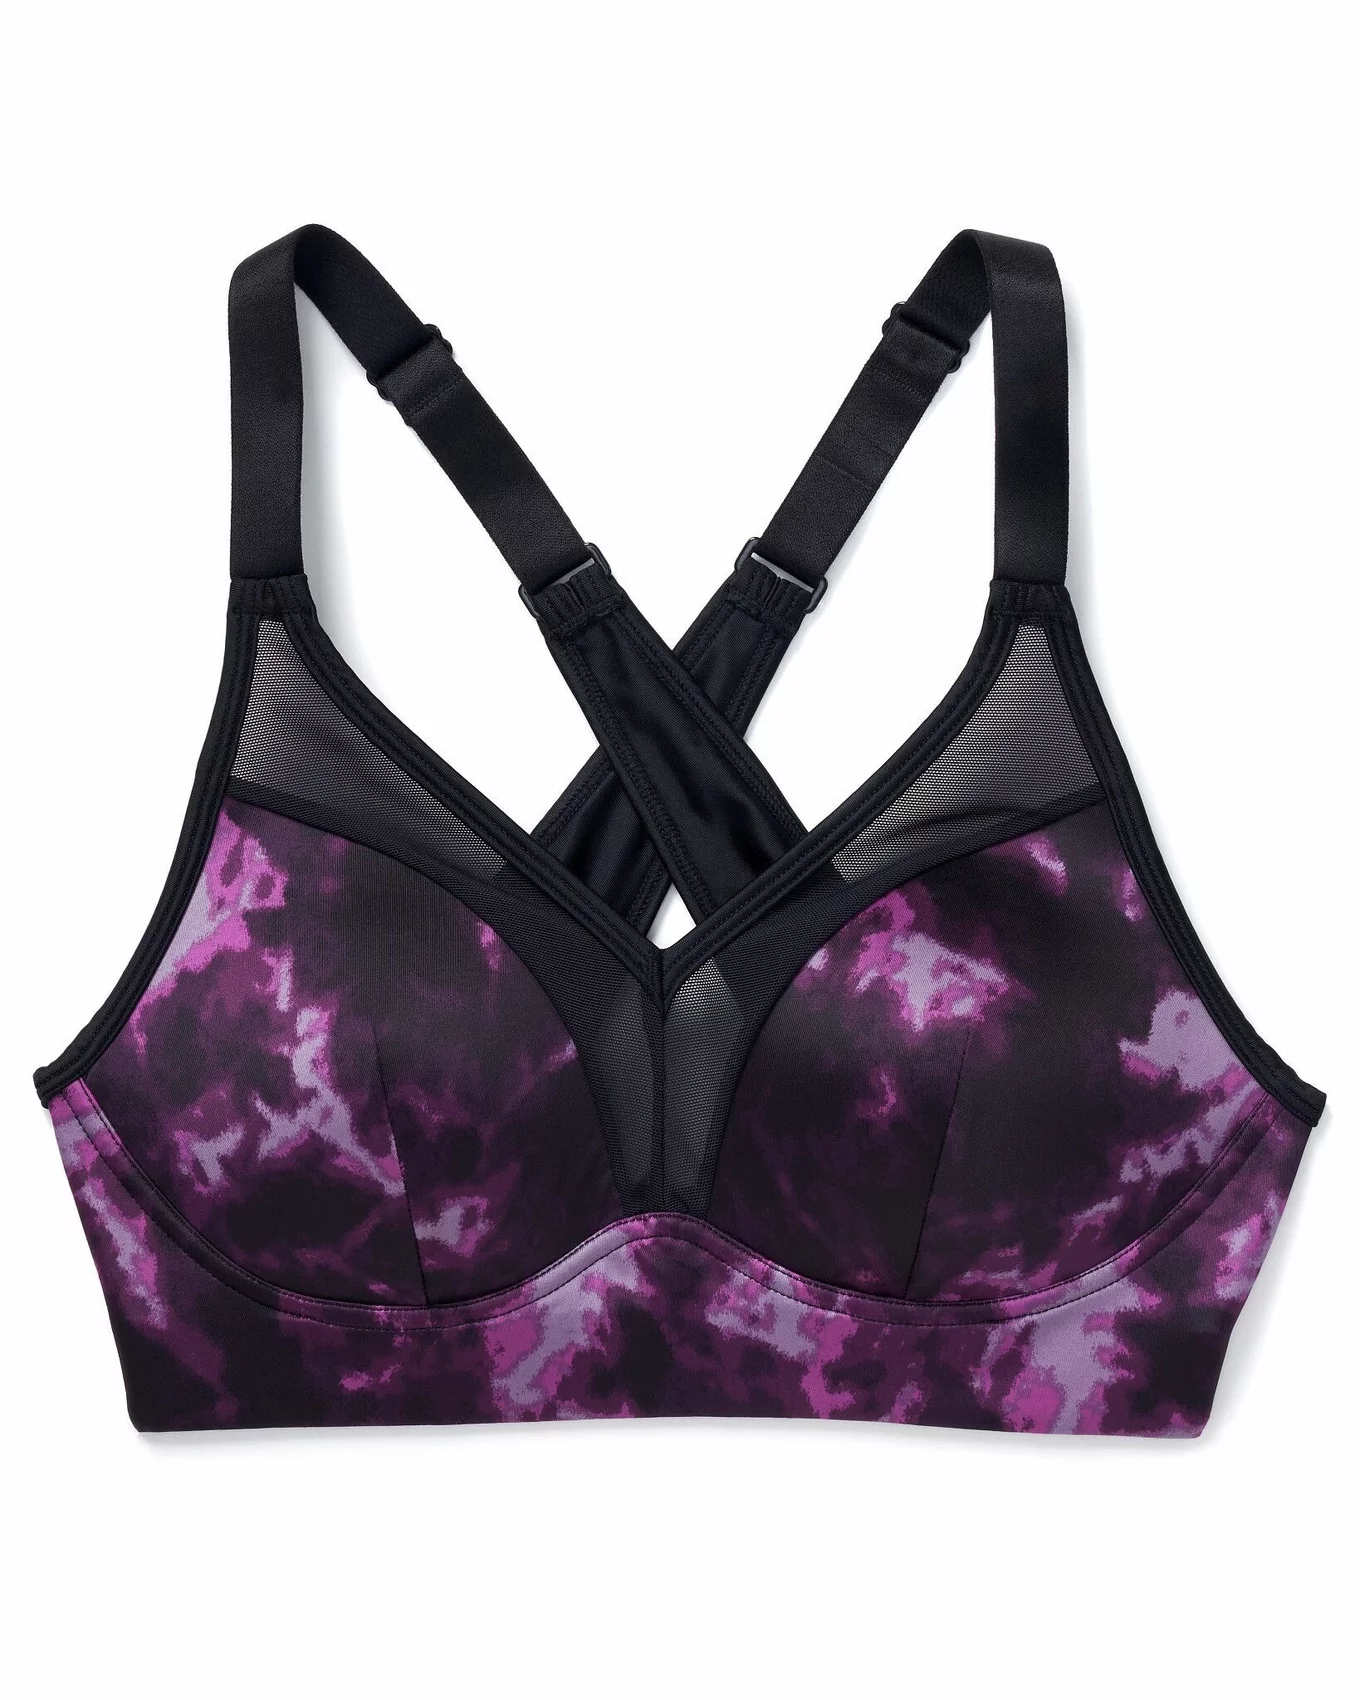 Buy In Care LINGERIE SPORTS-02 (B) Black Purple Solid Color Full-Coverage  Sports Bra. at